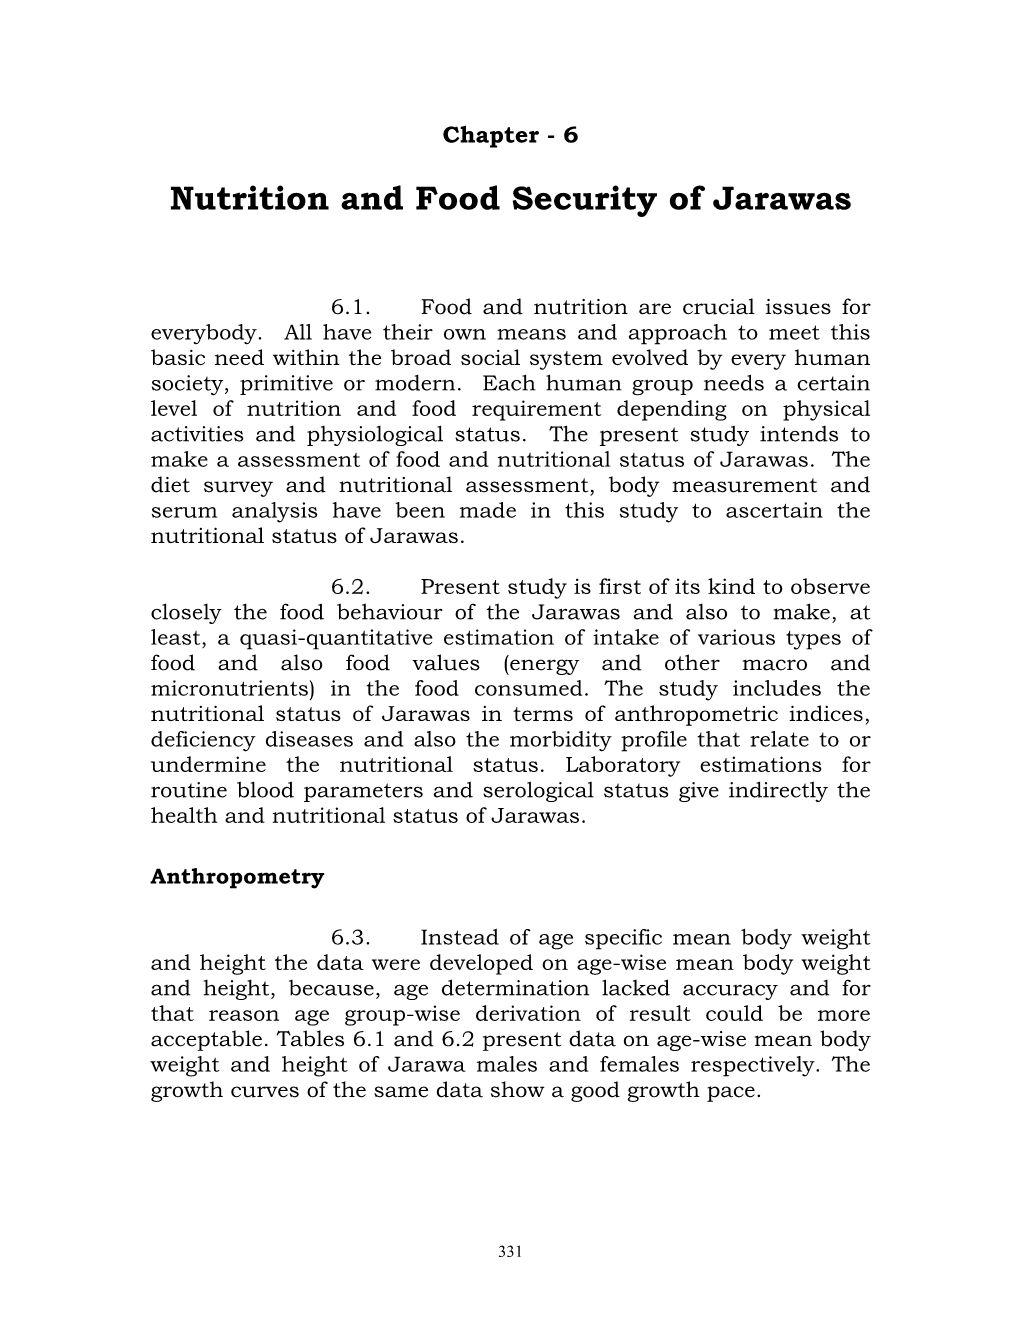 Nutrition and Food Security of Jarawas